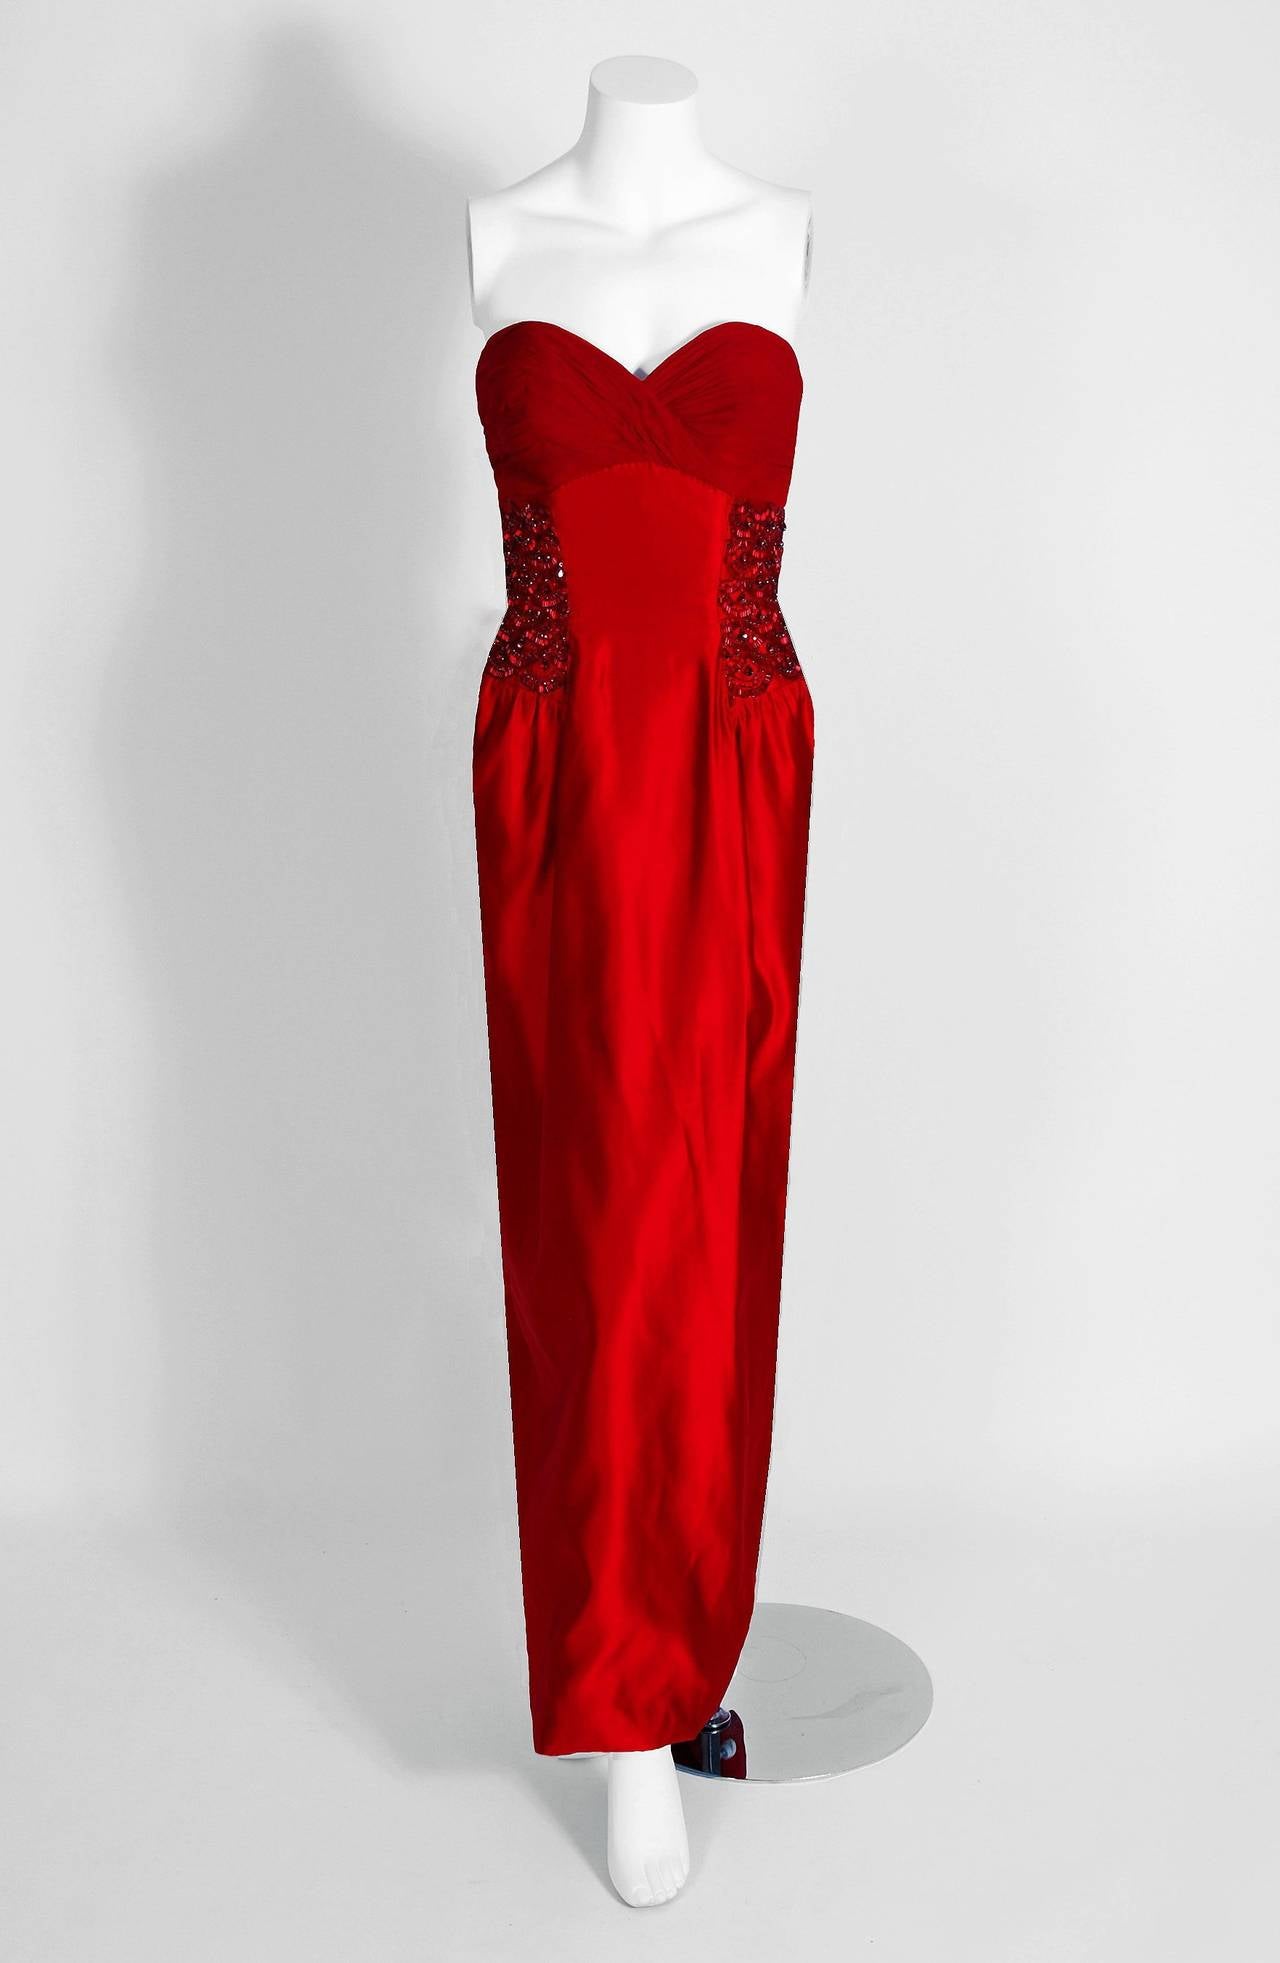 1950's Seductive Ruby-Red Beaded Satin Chiffon Strapless Hourglass Evening Gown 1